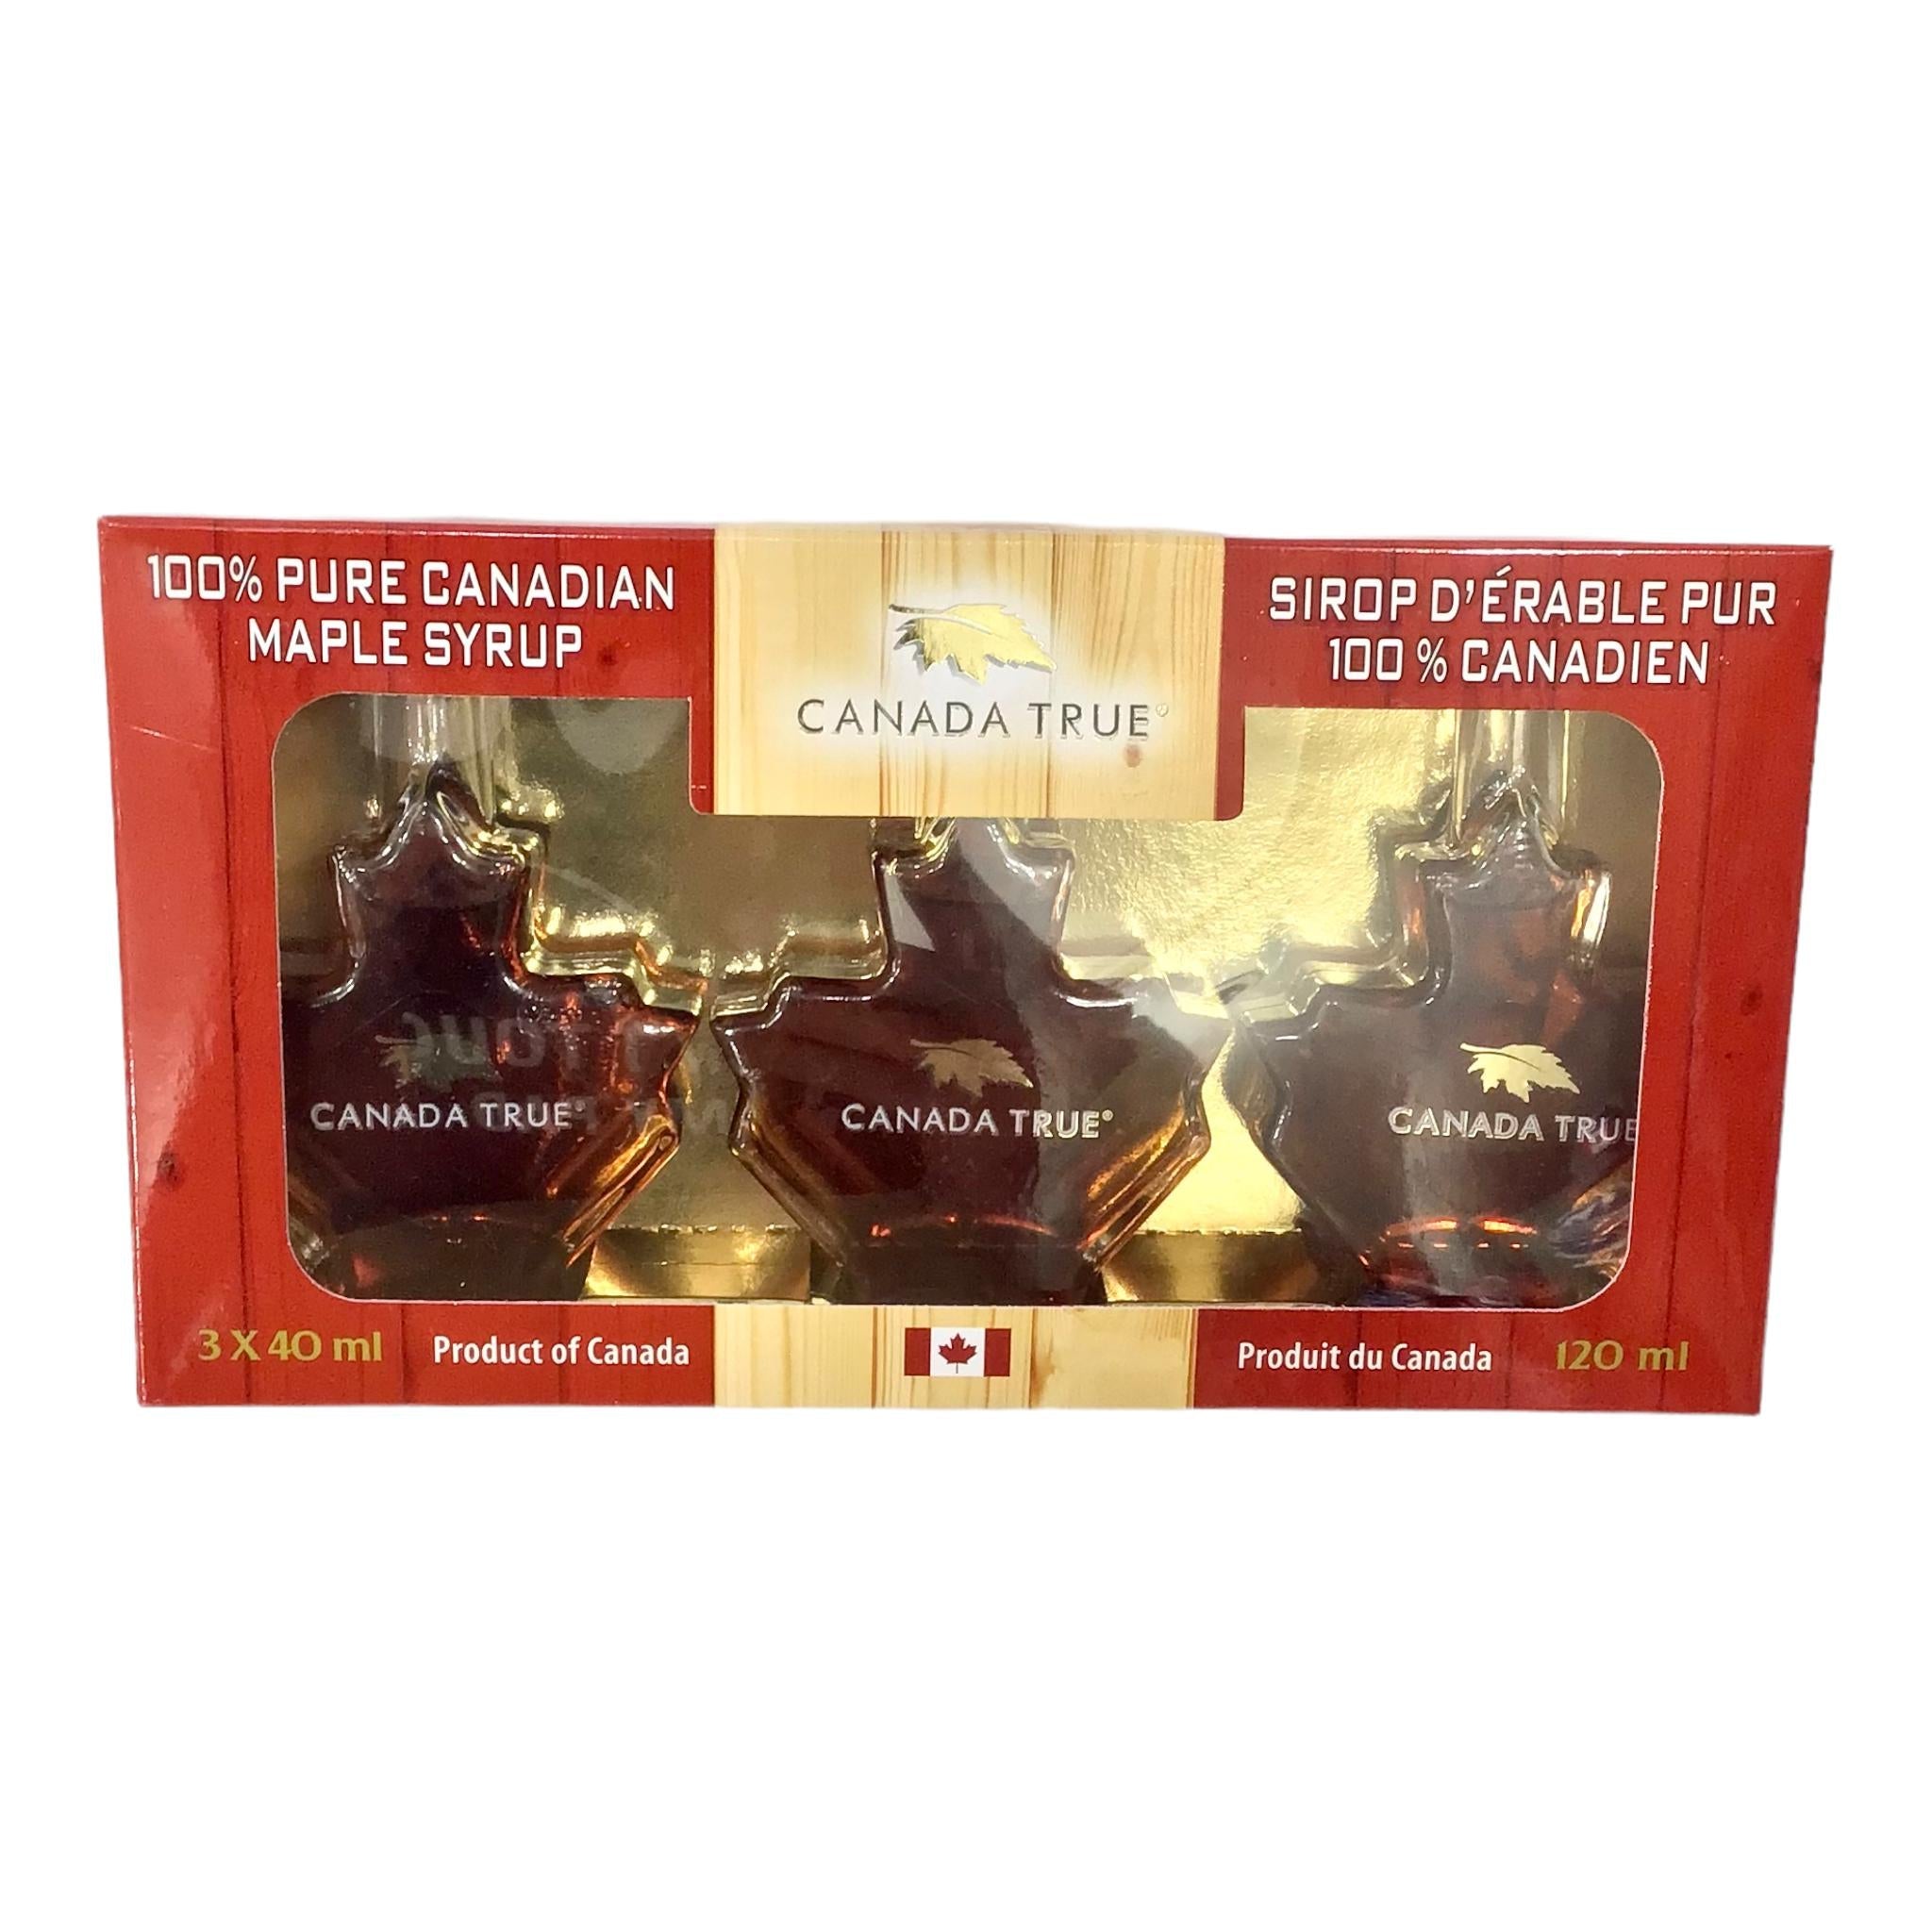 Canada True 100% Pure Canadian Maple Syrup 3x40ML Maple Leaf Shaped Bottles Gift Box